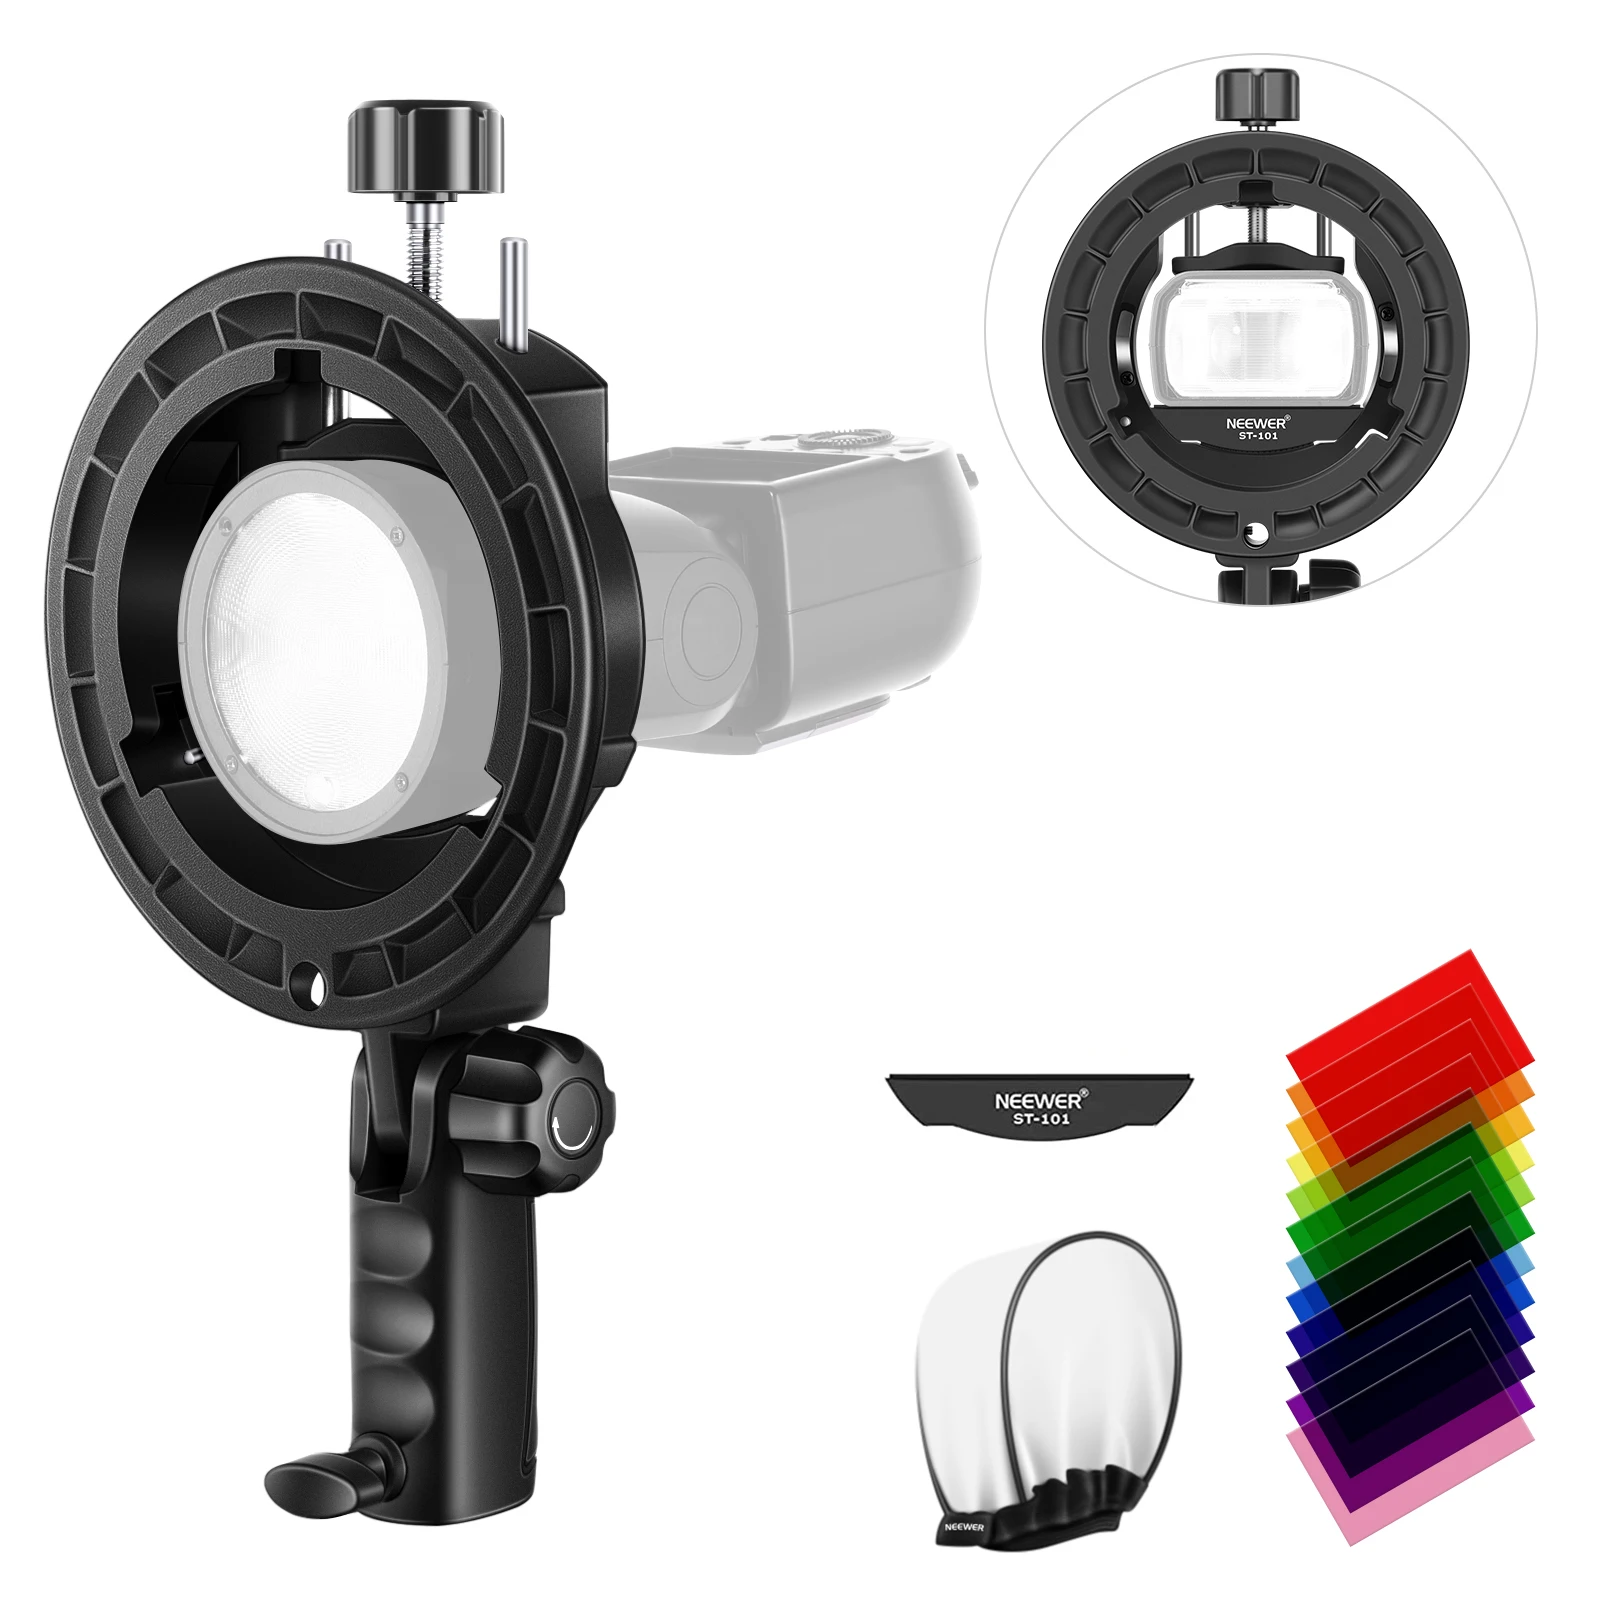 

Neewer Speedlite S-Type Bracket Bowens Mount Flash Holder with Color Filters For Neewer NW625 NW635 NW645 NW655 NW-670 750II V1